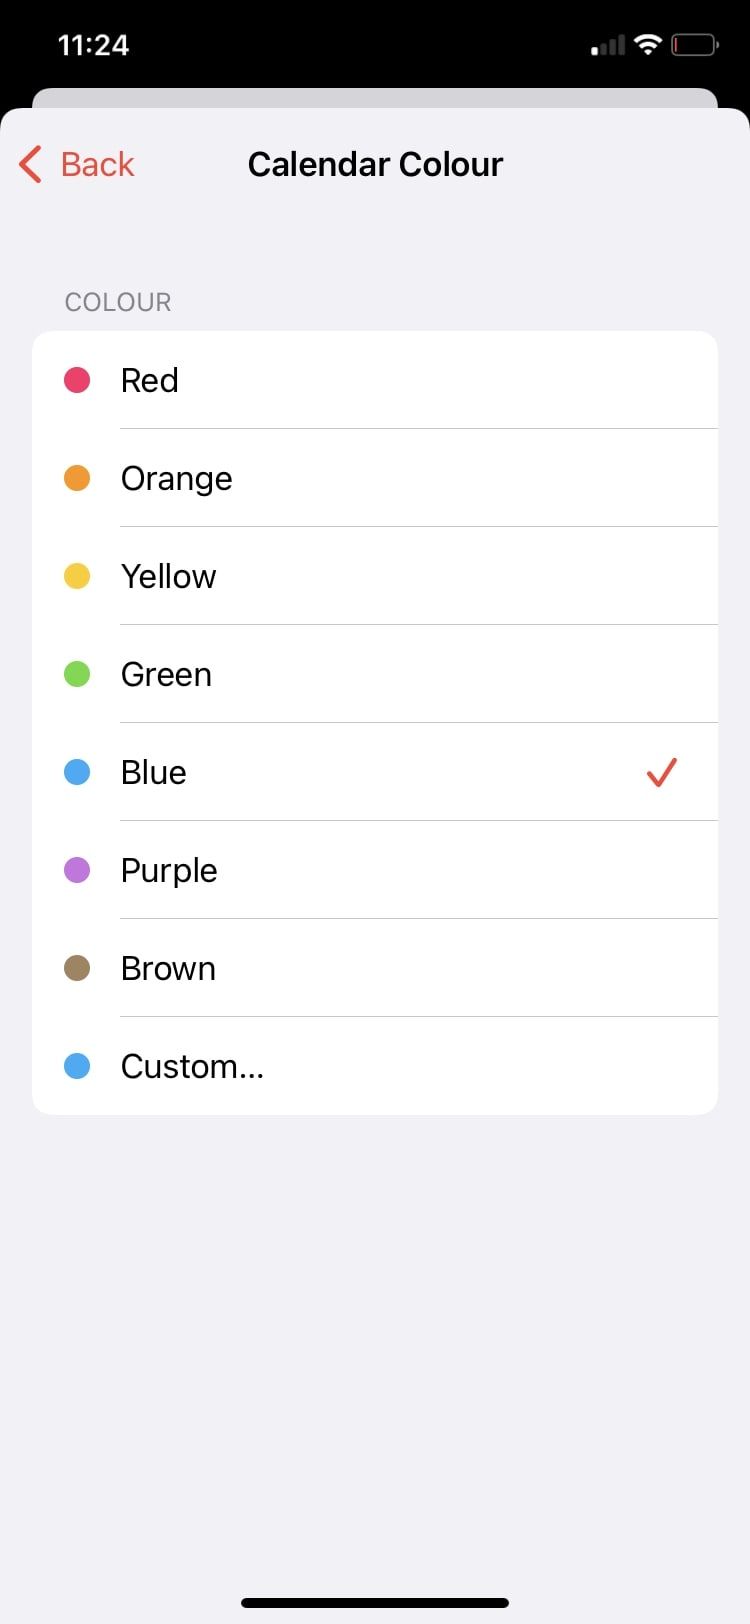 How to Change the Calendar Color on Your iPhone or iPad